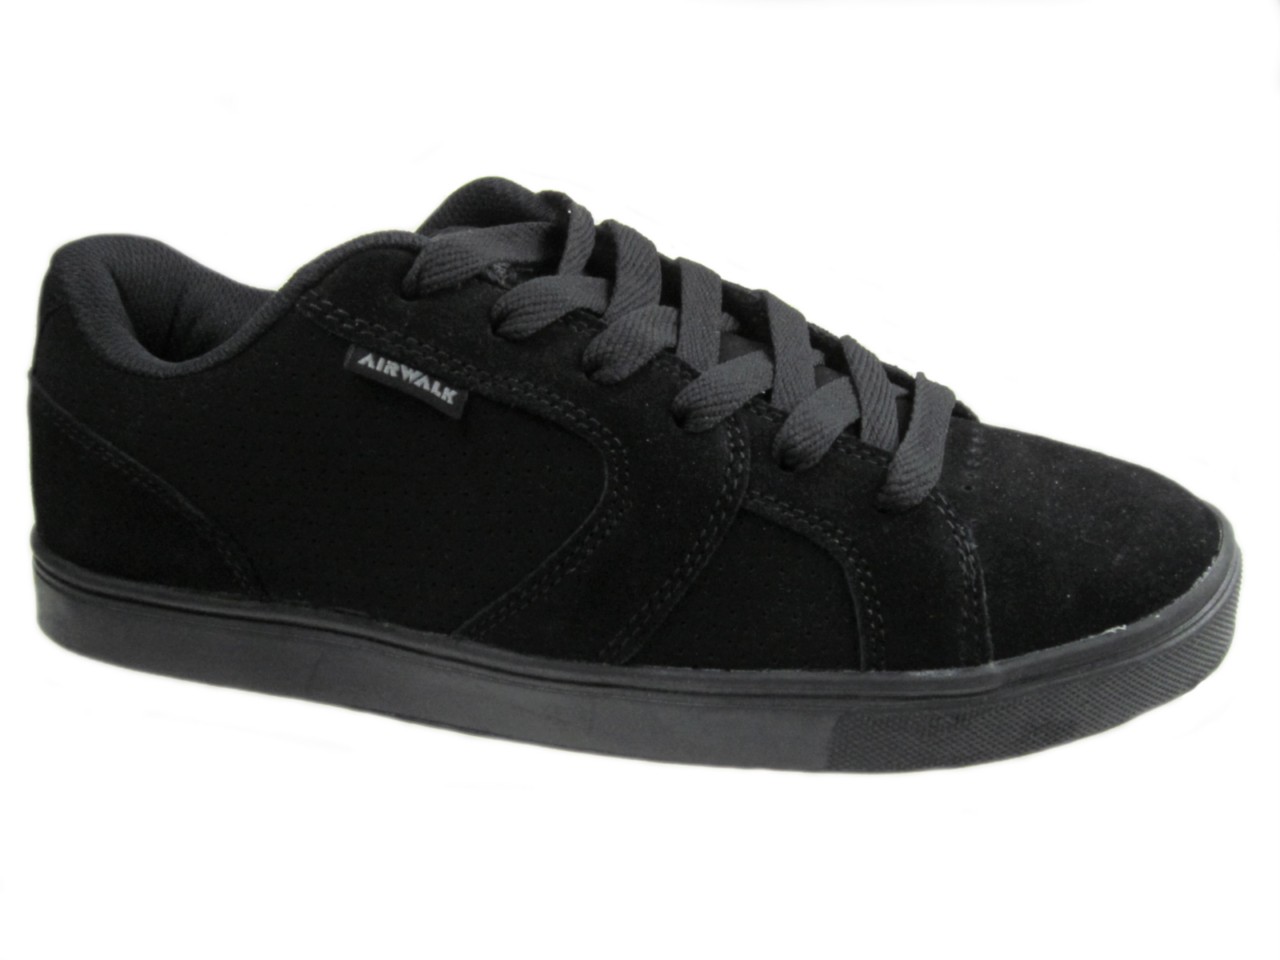 AIRWALK PACIFIC LACE UP SKATE TRAINERS BLACK SUEDE SIZE UK 7-12 RRP £69 ...